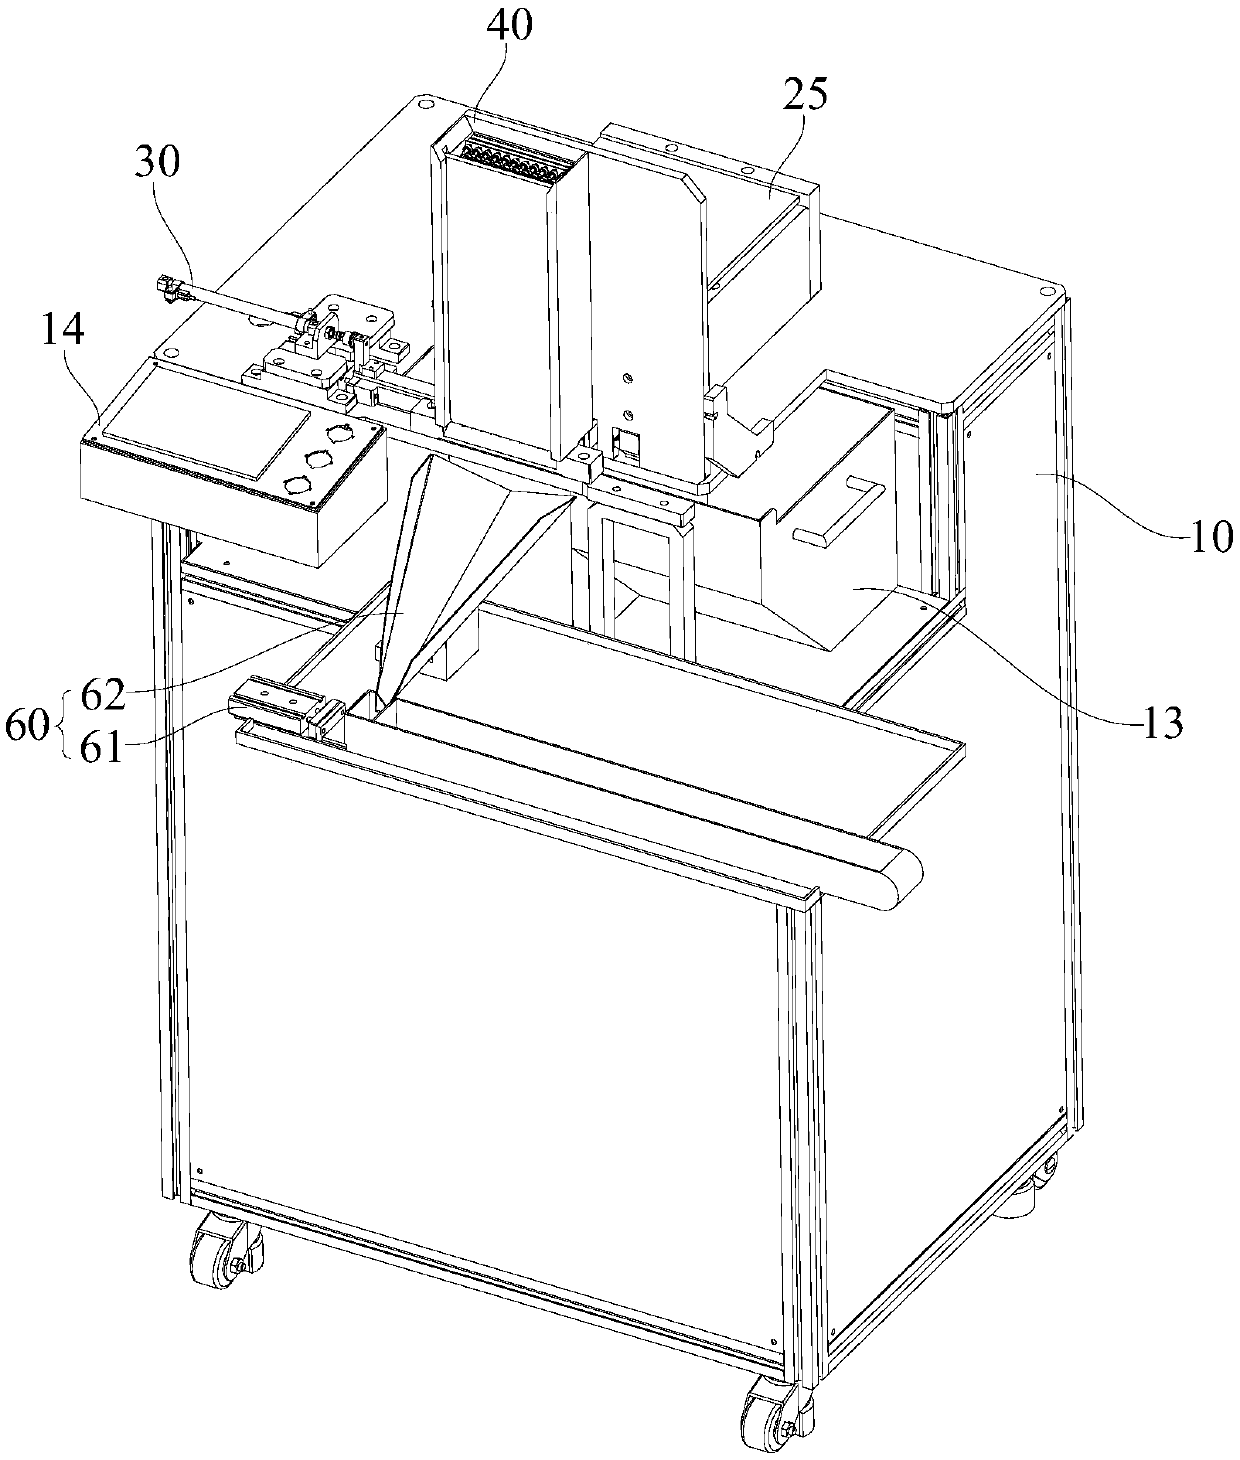 Material pushing device